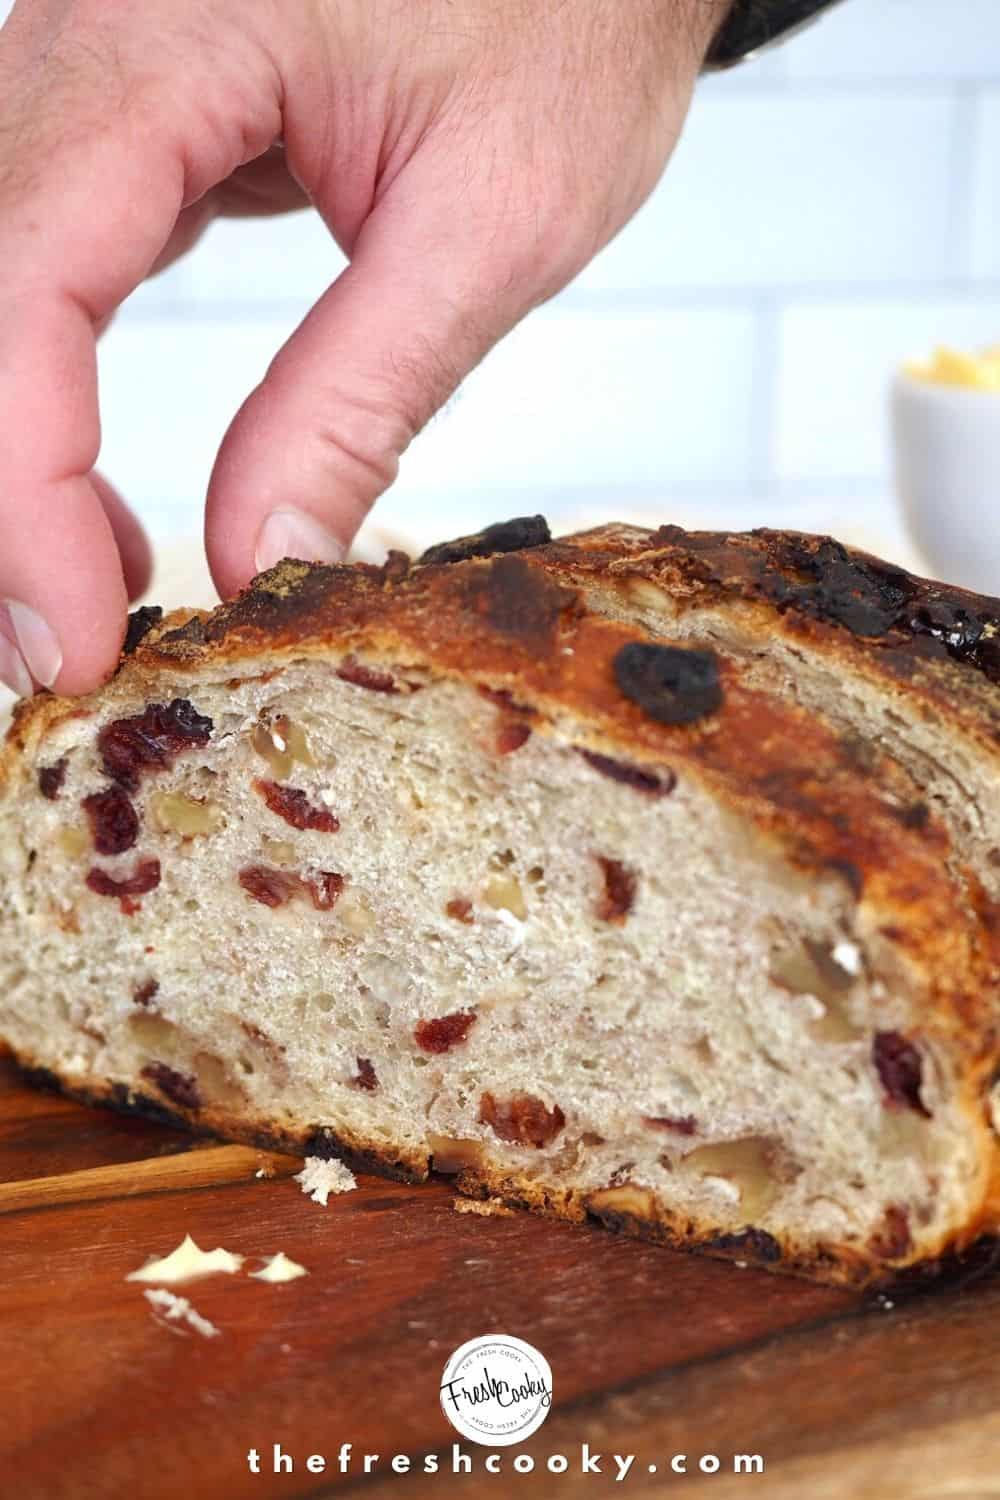 Man's hand pulling a freshly sliced piece of cranberry walnut bread from loaf.